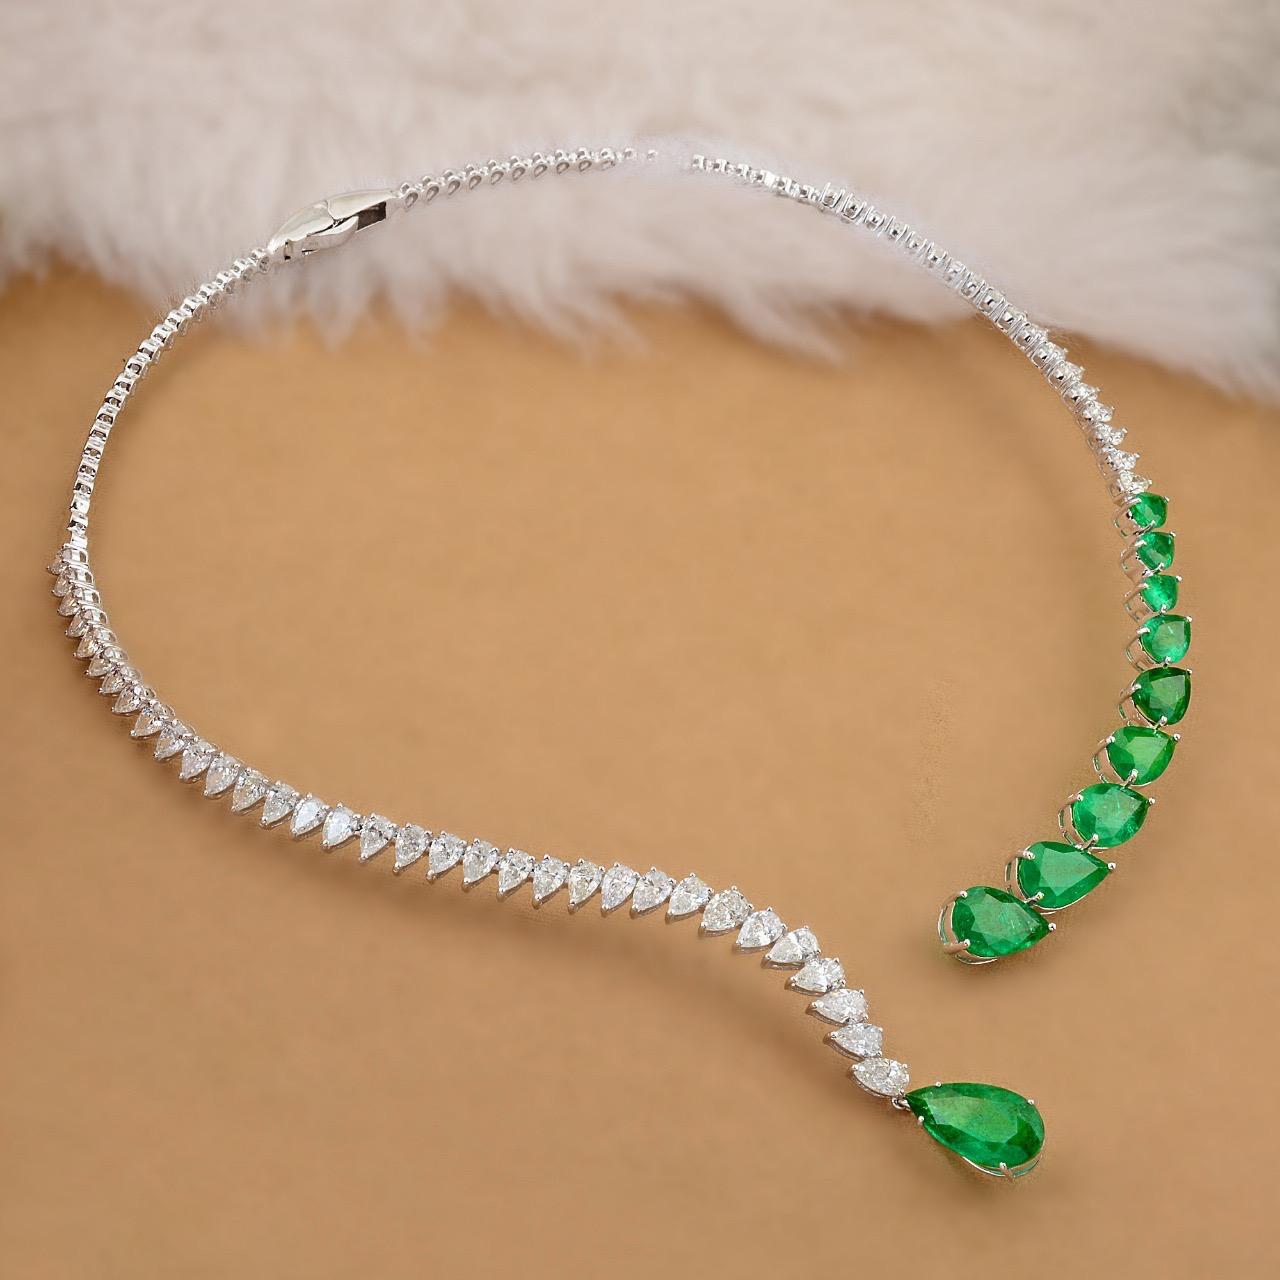 Cast from 14-karat gold, this exquisite necklace is hand set with 20.85 carats Emerald and 11.0 carats of sparkling diamonds. 

FOLLOW MEGHNA JEWELS storefront to view the latest collection & exclusive pieces. Meghna Jewels is proudly rated as a Top